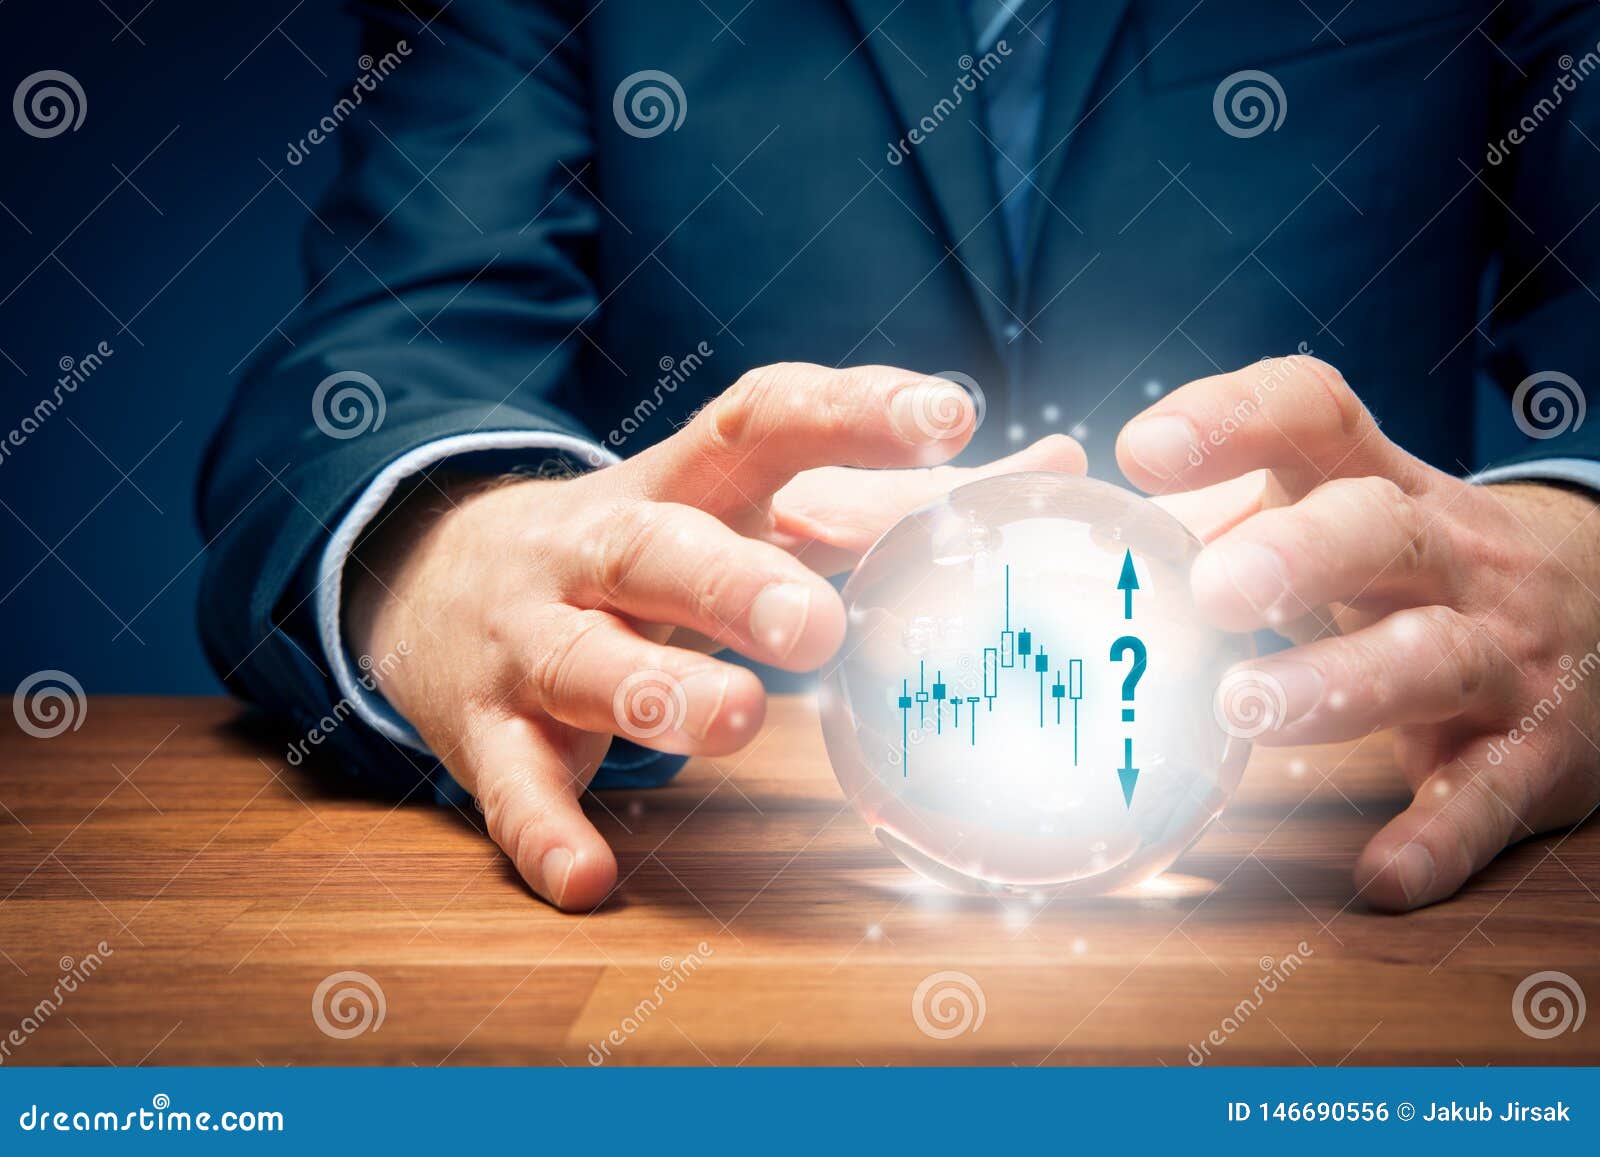 investment prediction concept with crystal ball